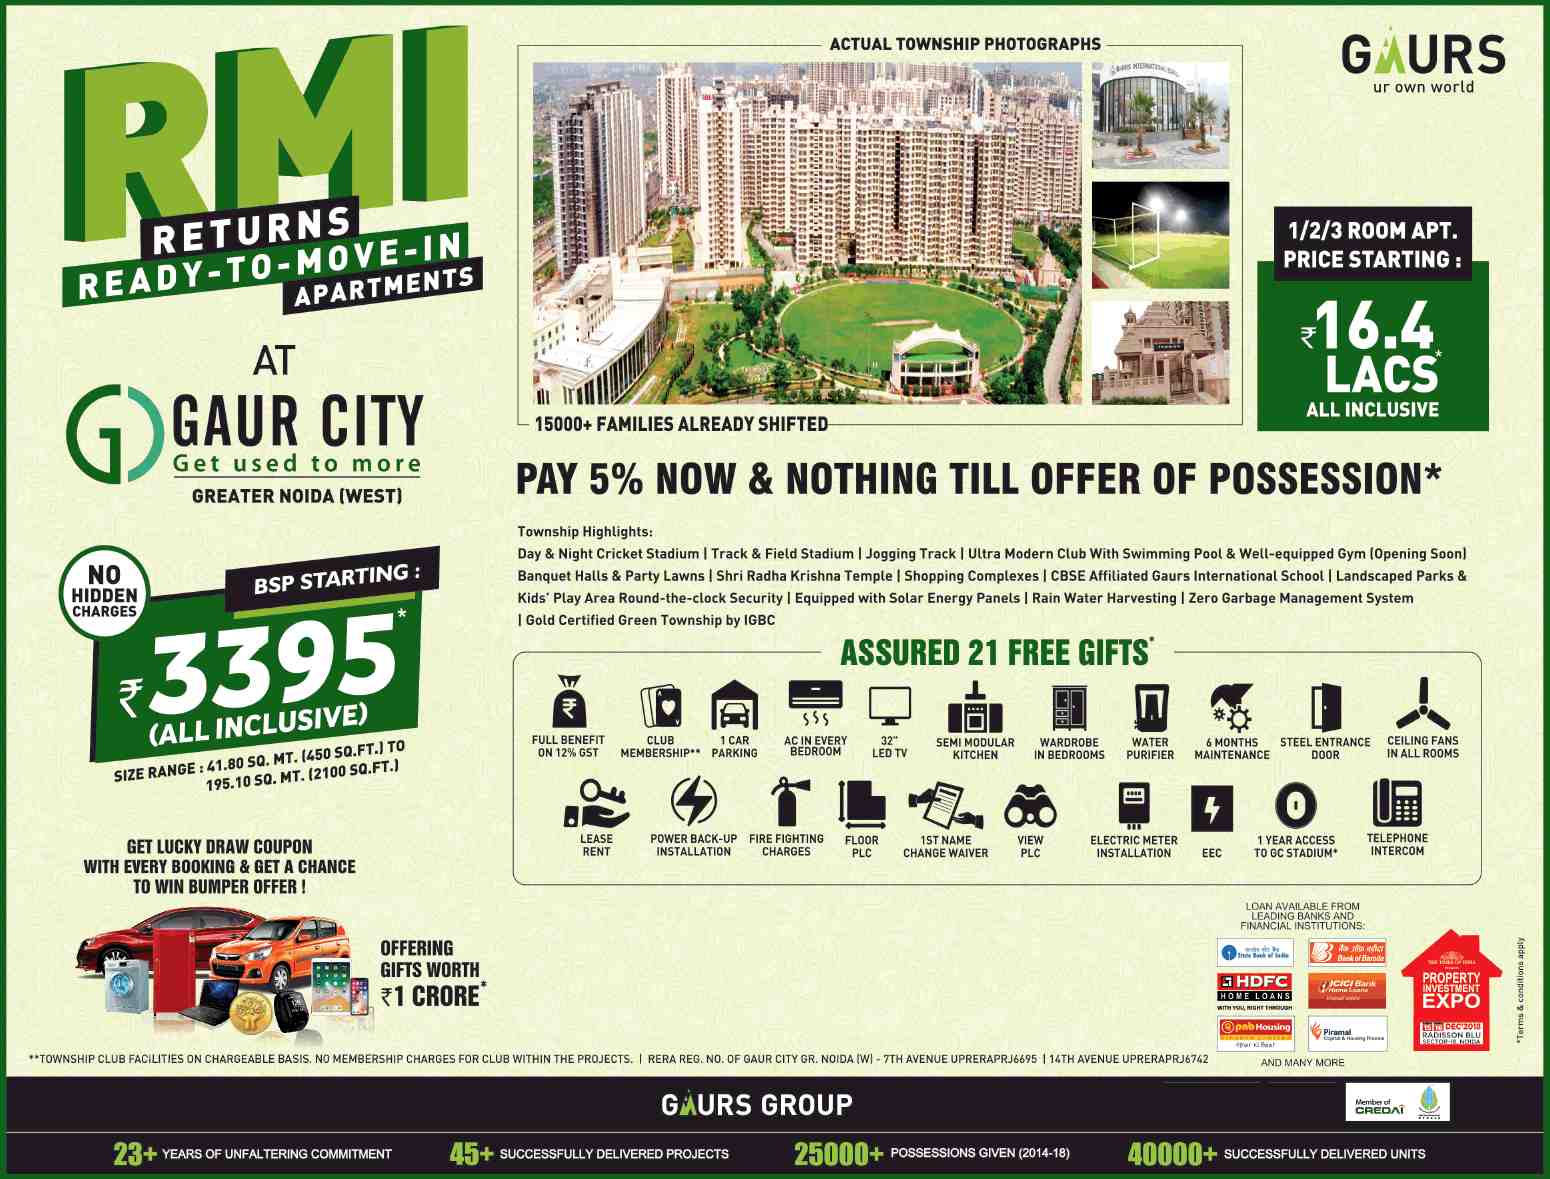 Pay 5% now and nothing till possession at Gaur City in Greater Noida